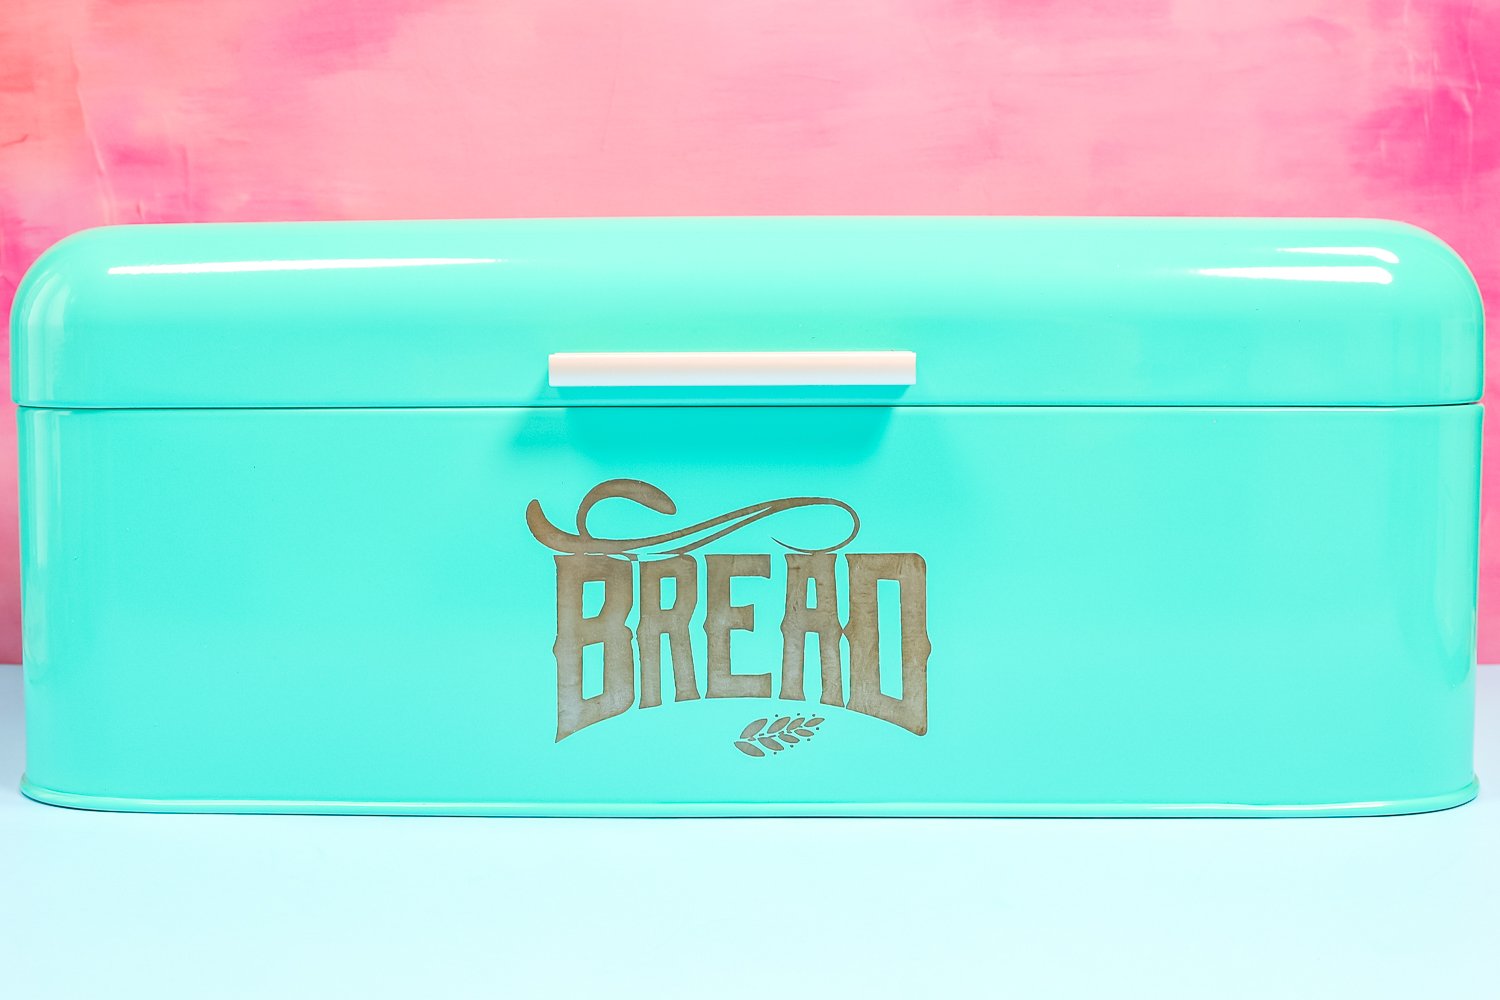 Bread box customized with Citristrip stripping gel.